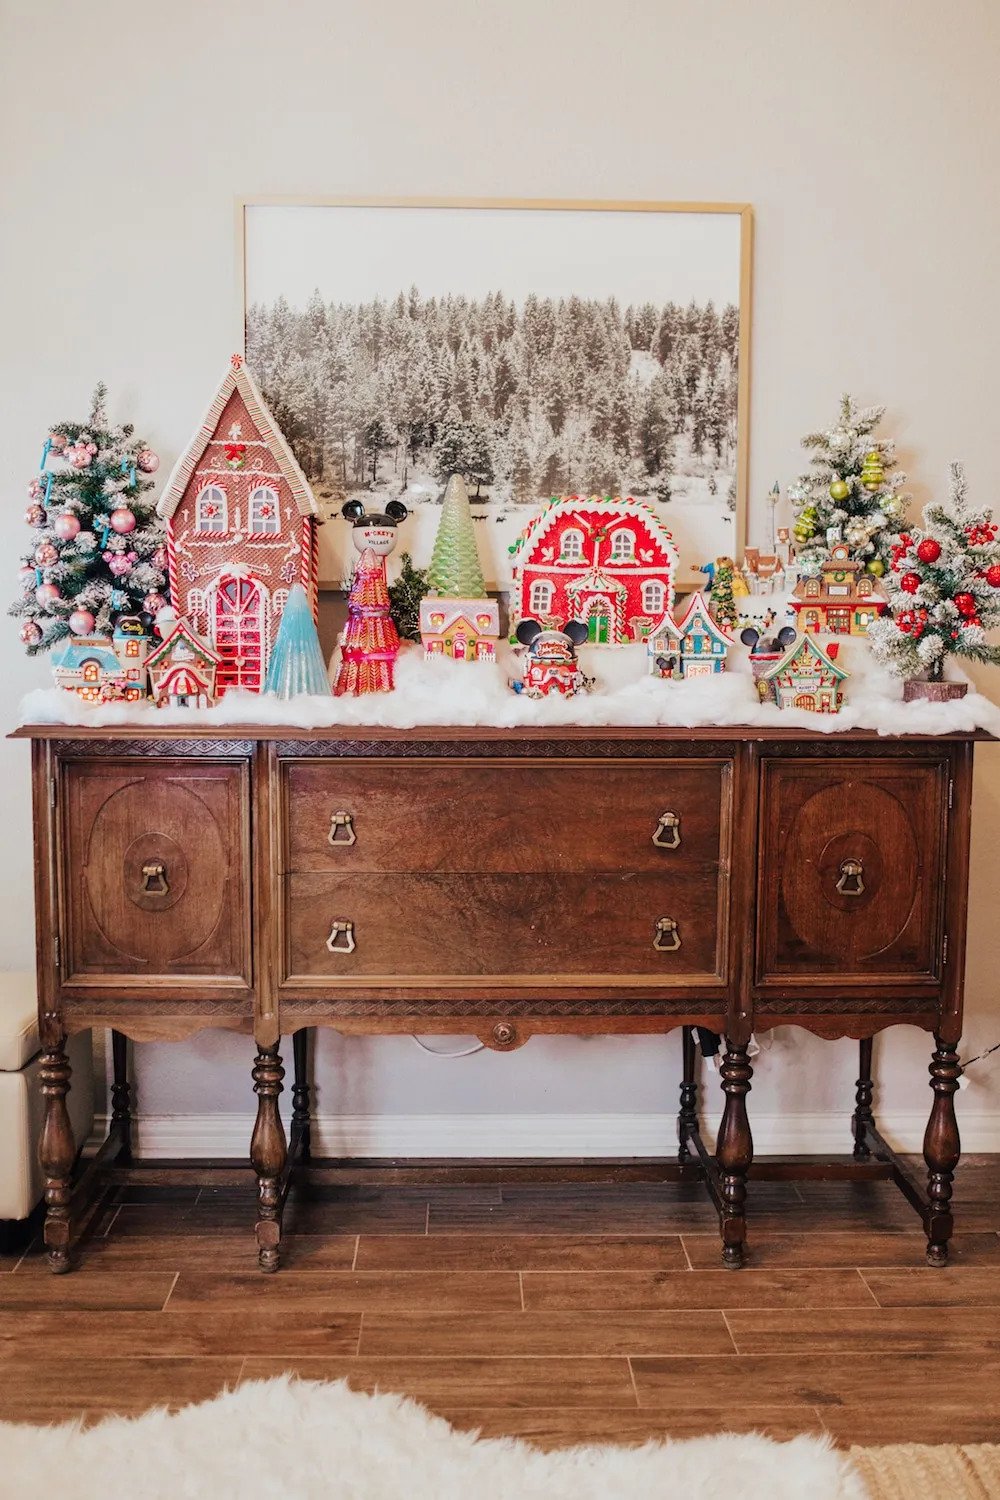 The best Christmas village ideas and Christmas village display ideas to try this year